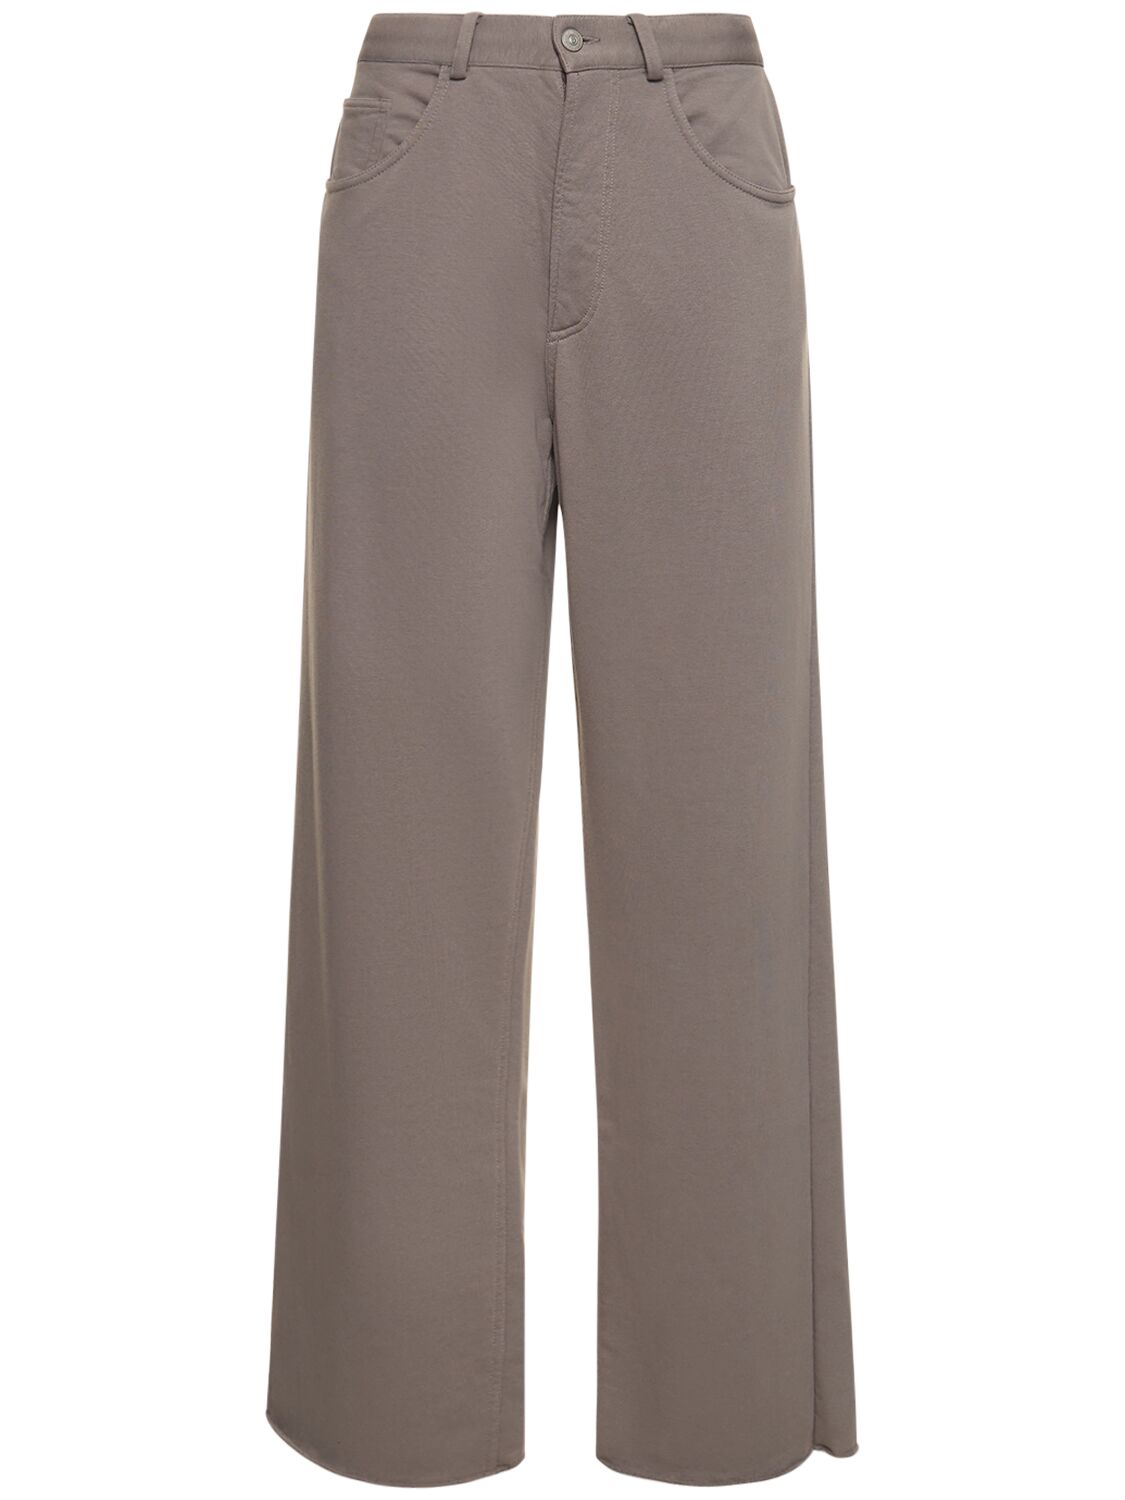 Mm6 Maison Margiela Unbrushed Cotton Blend Wide Pants In Grey